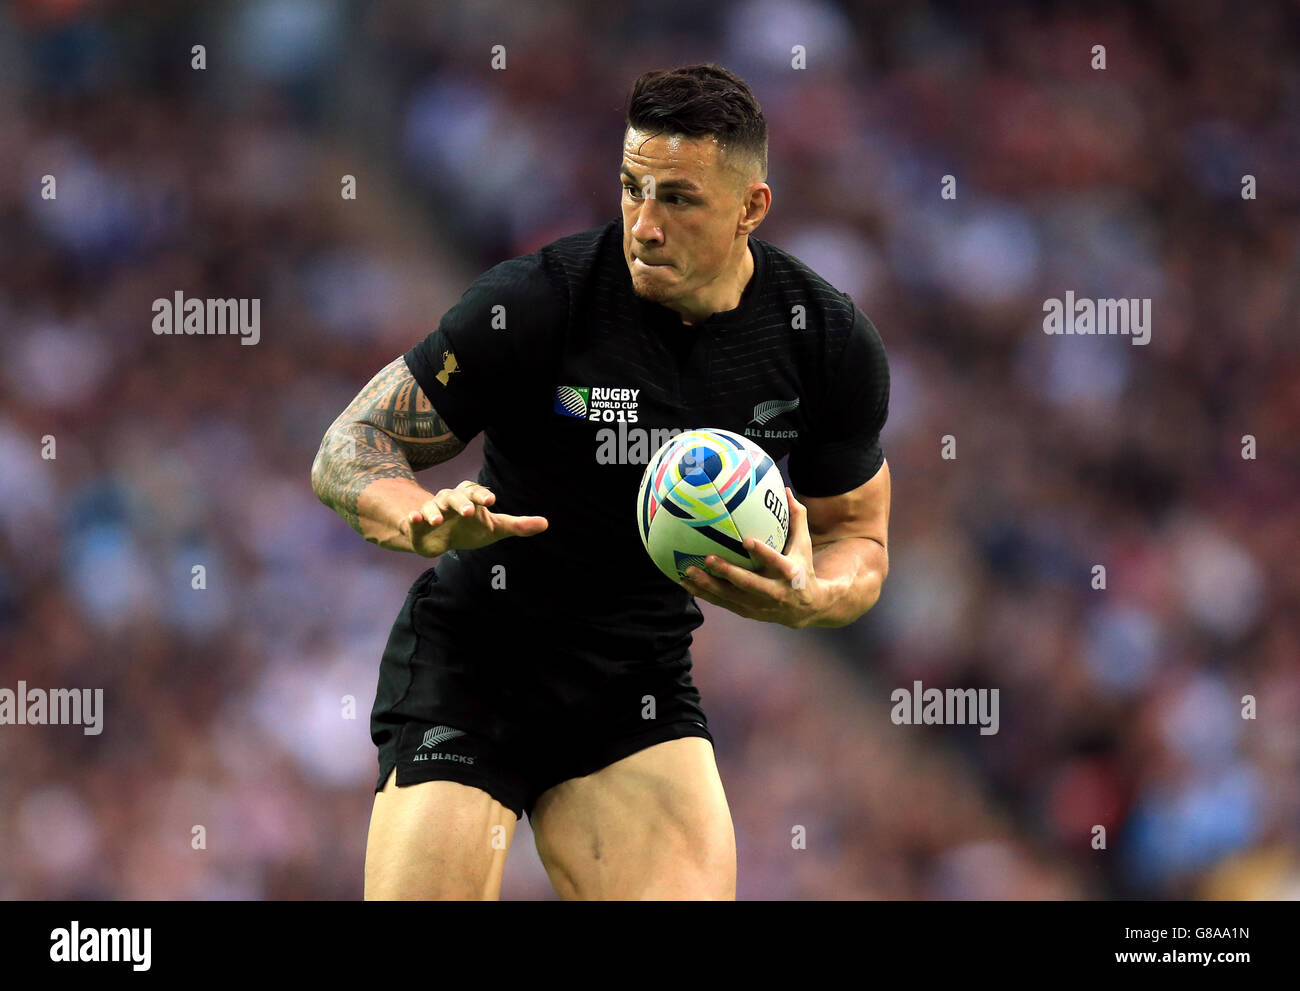 Rugby Union - Rugby World Cup 2015 - Pool C - New Zealand v Argentina - Wembley Stadium. New Zealand's Sonny Bill Williams during the Rugby World Cup match at Wembley Stadium, London. Stock Photo